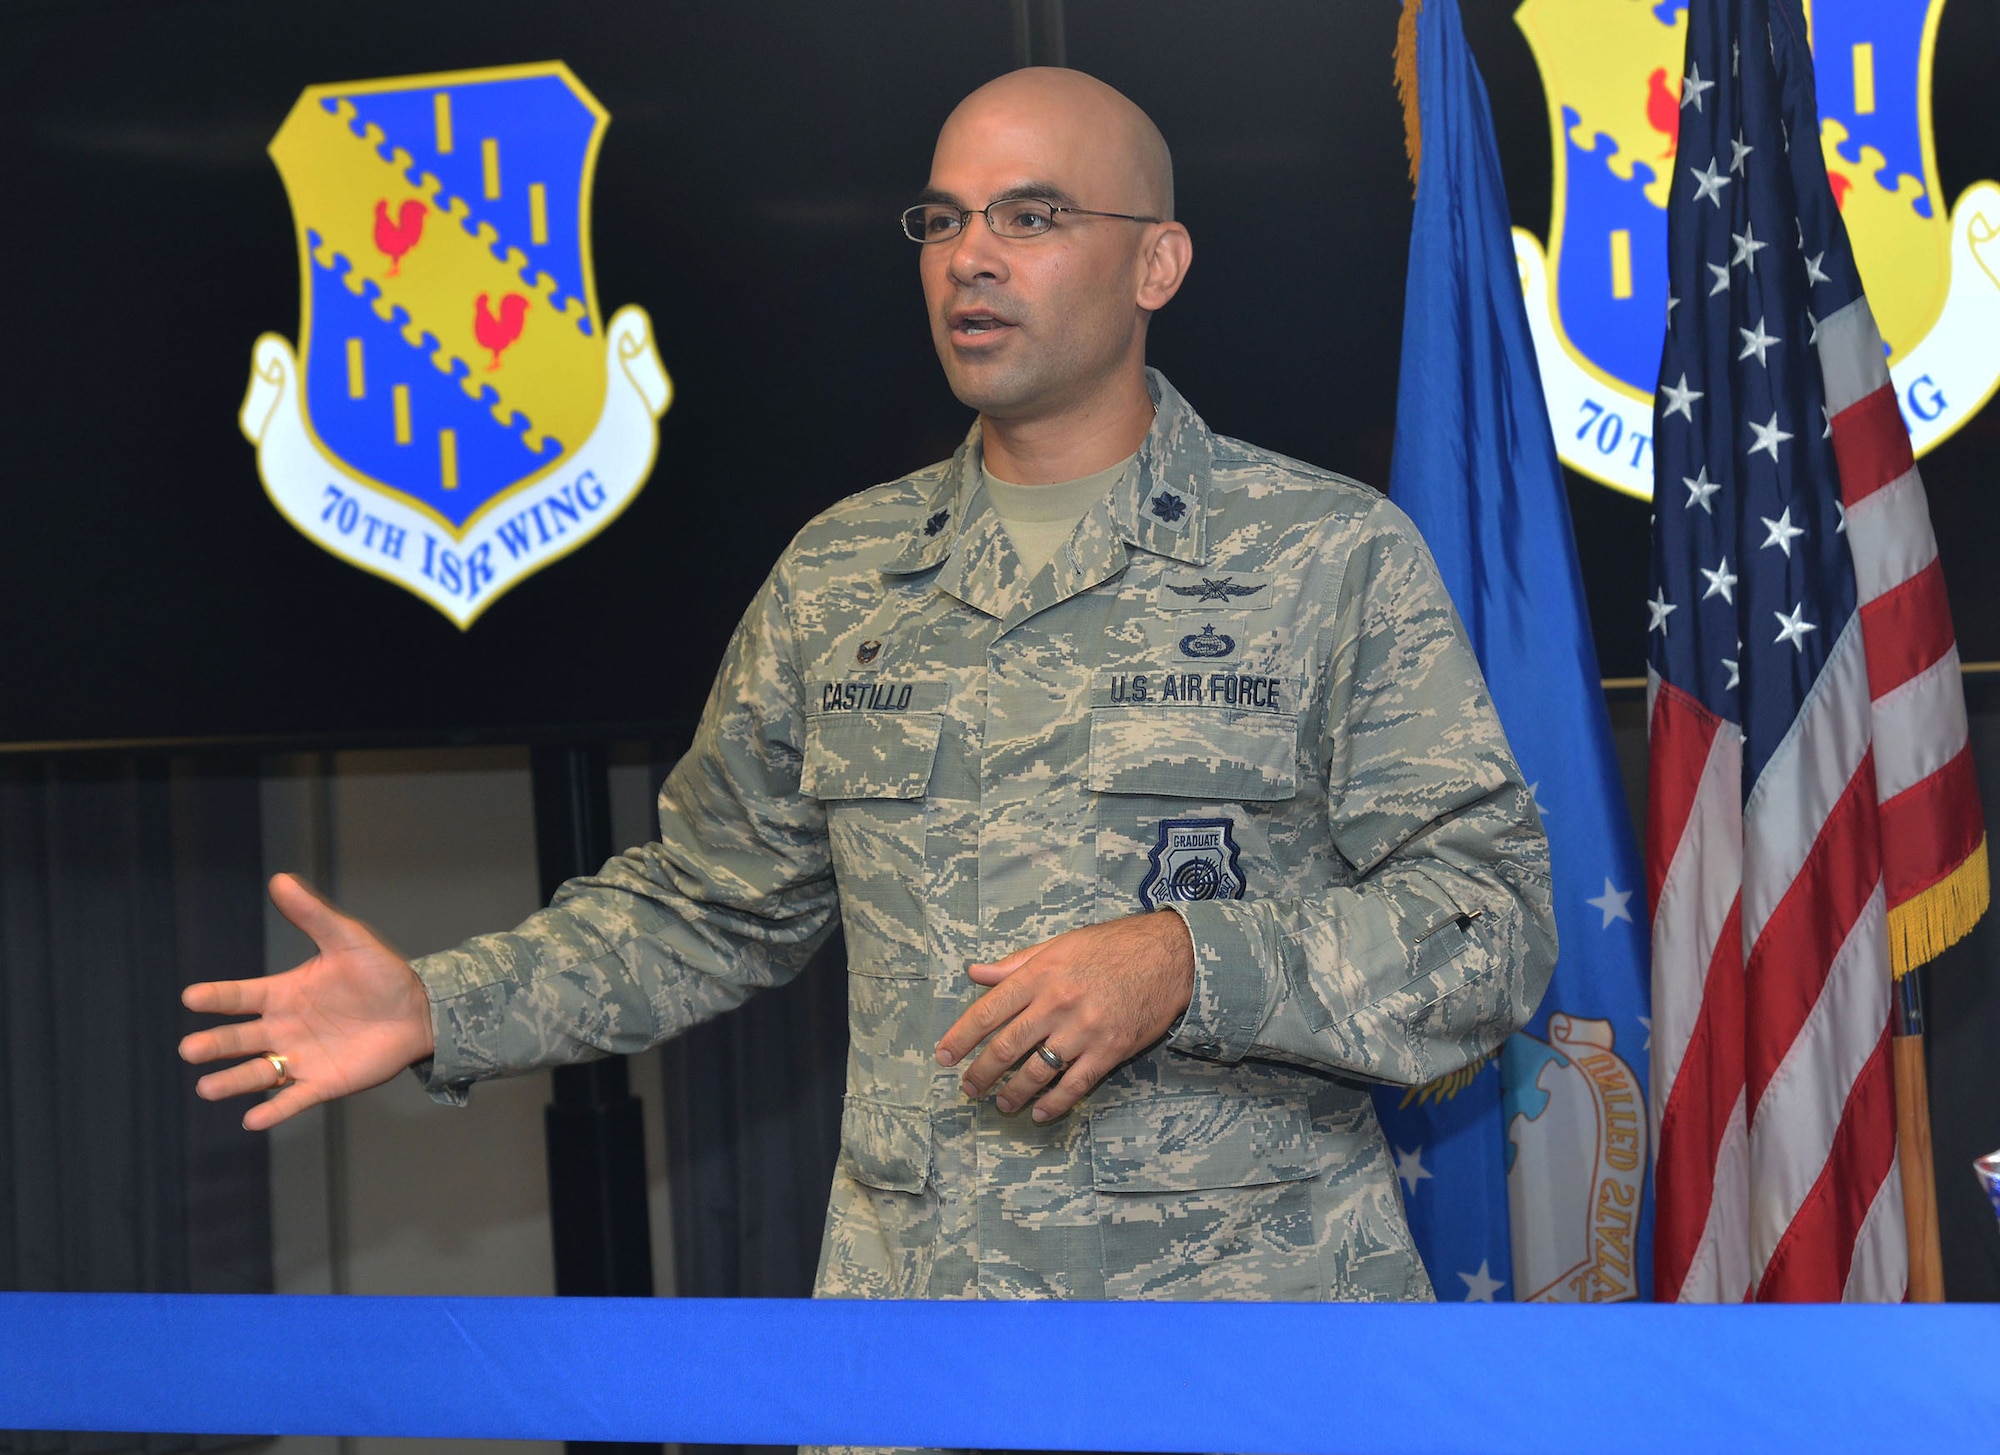 Lt. Col. Matthew Castillo, commander, 35th Intelligence Squadron, speaks about the Cyberspace Threat Intelligence Center during the ribbon cutting ceremony Apr. 10. Airmen and contractors with the 35th IS will be conducting operations to provide intelligence within the cyberspace domain at the CTIC. (U.S. Air Force photo by Lori Bultman)